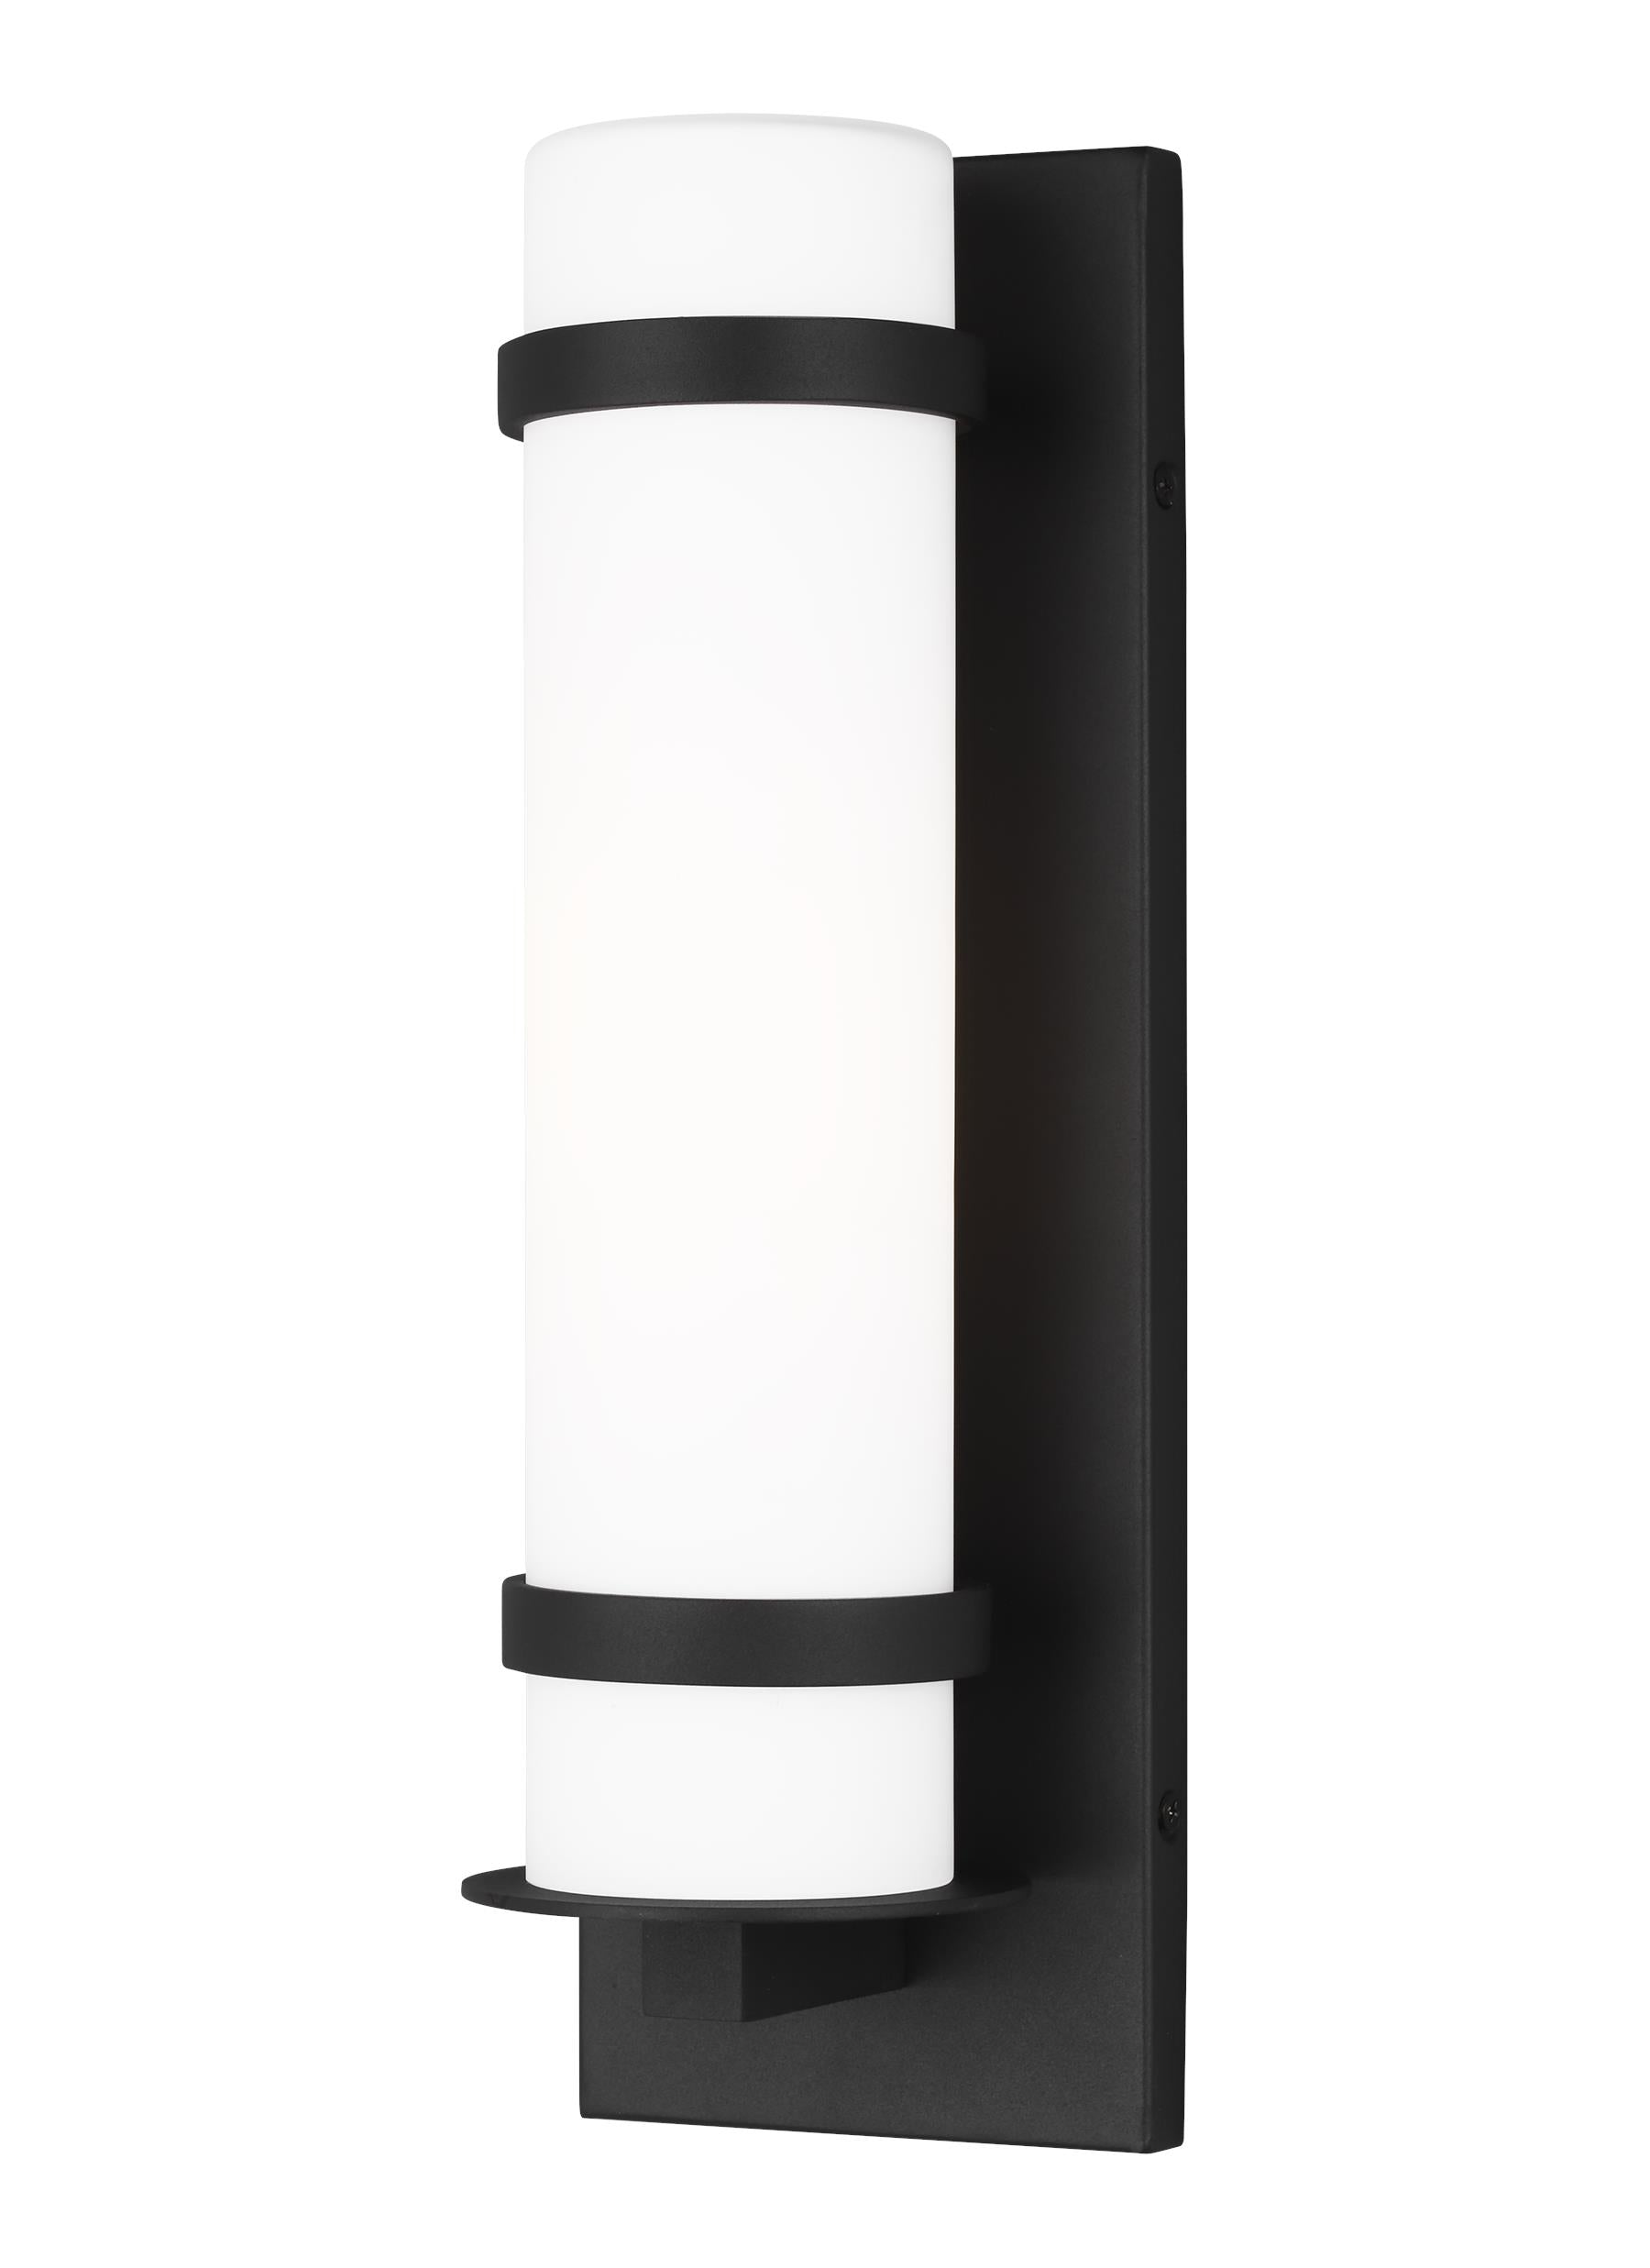 Alban modern 1-light outdoor exterior small wall lantern in black with etched opal glass shade